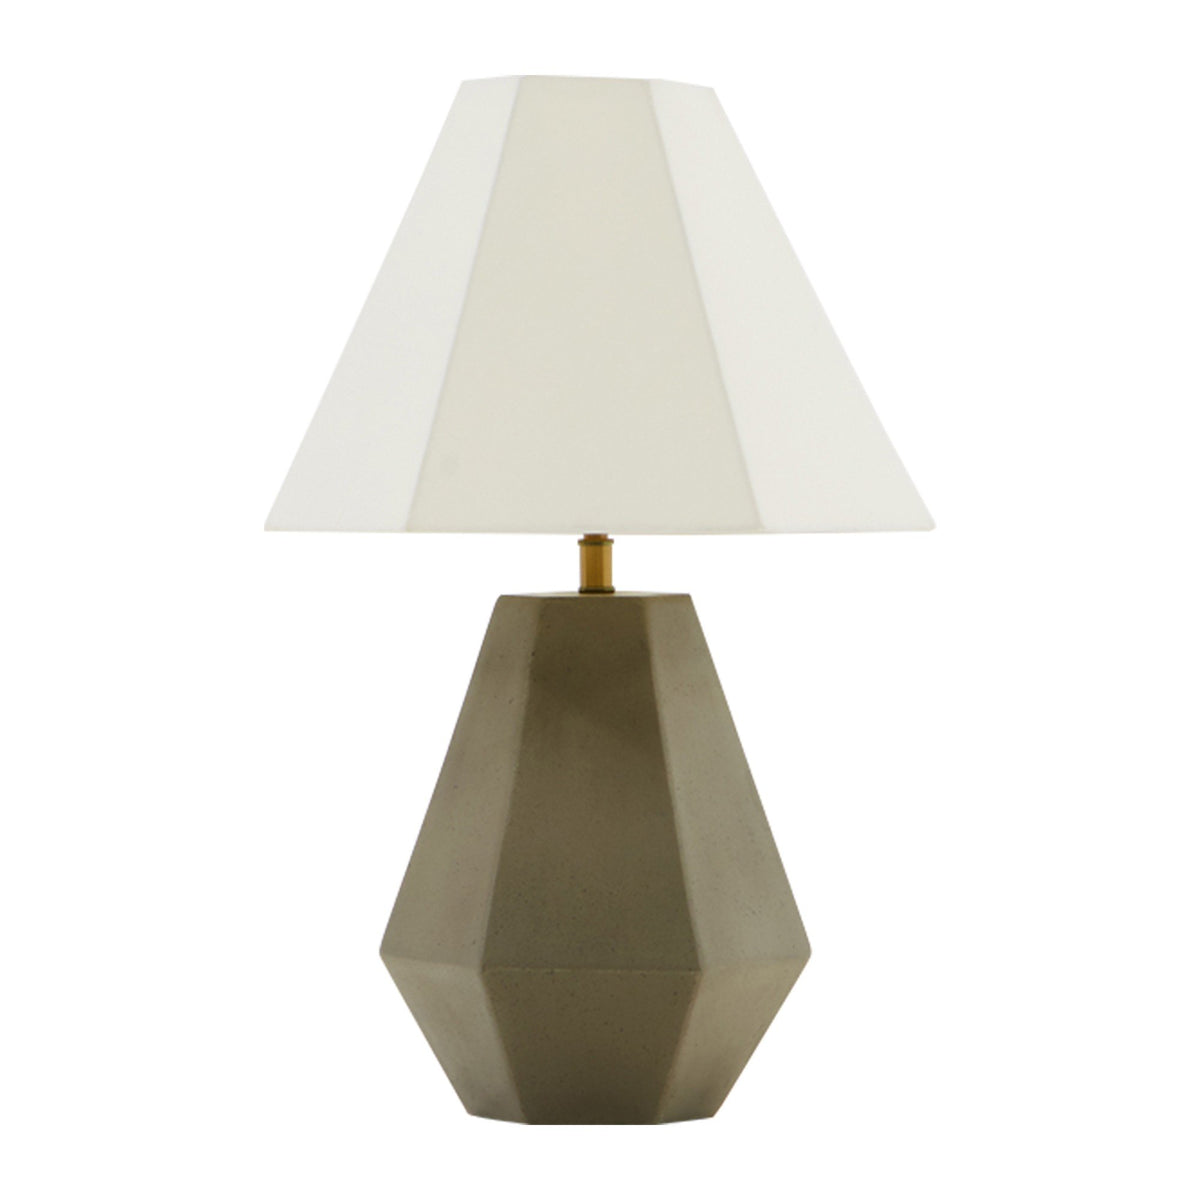 Concrete Base Modern Table Lamp with Empire Shade, White and Gray - BM219243